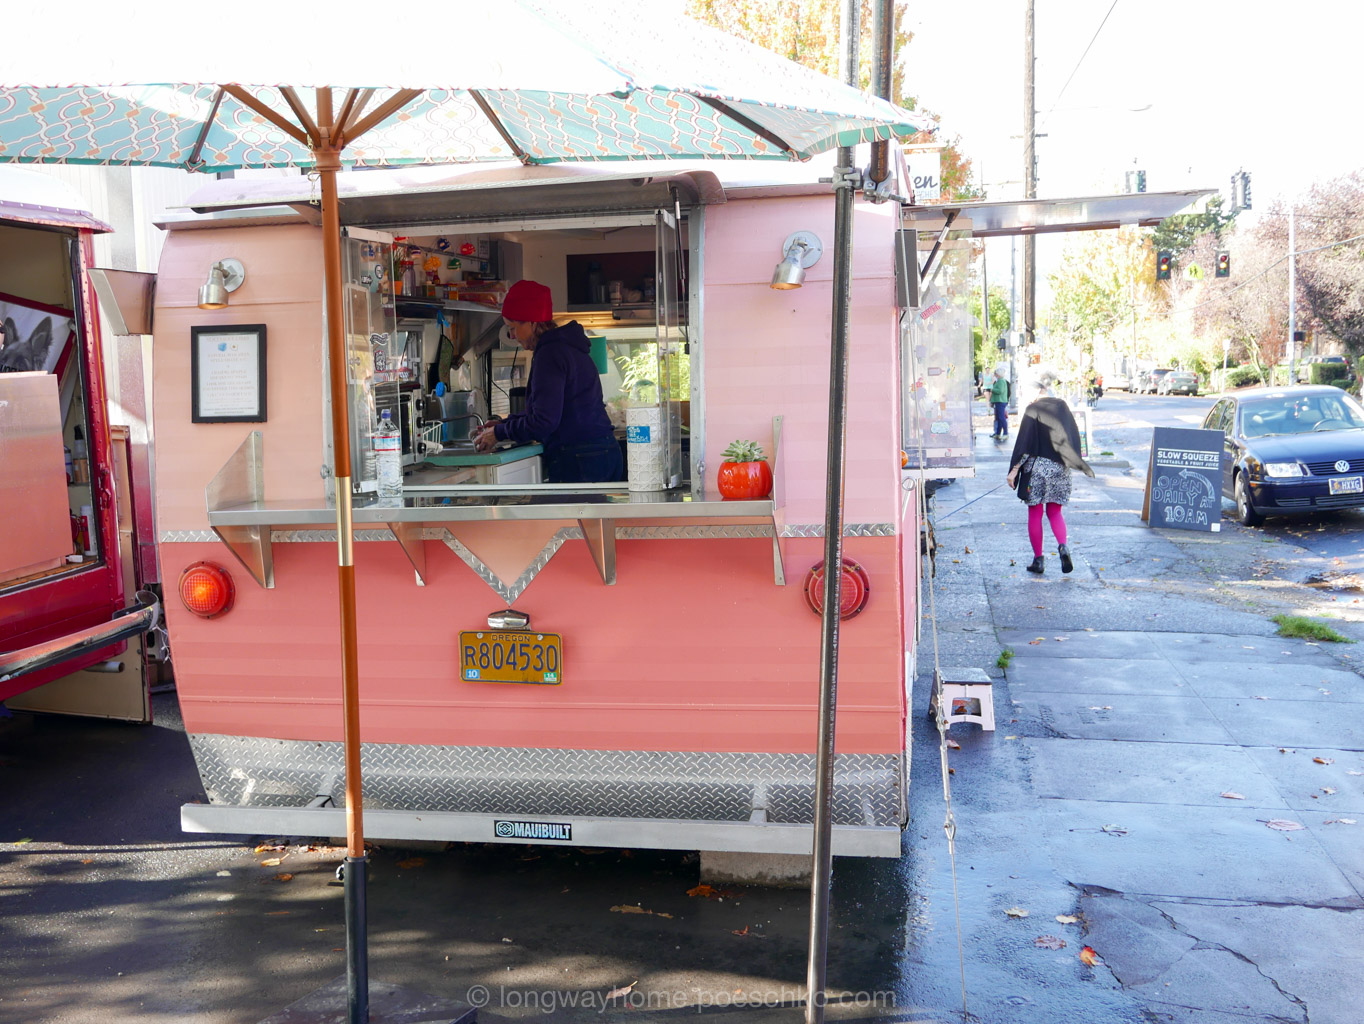 All parts of Portland are dotted with food carts, typically tiny trailers with one or two windows and a fully equipped kitchen inside, where tacos, thai food, gyros, ramen bowls, waffles and other delights are prepared.